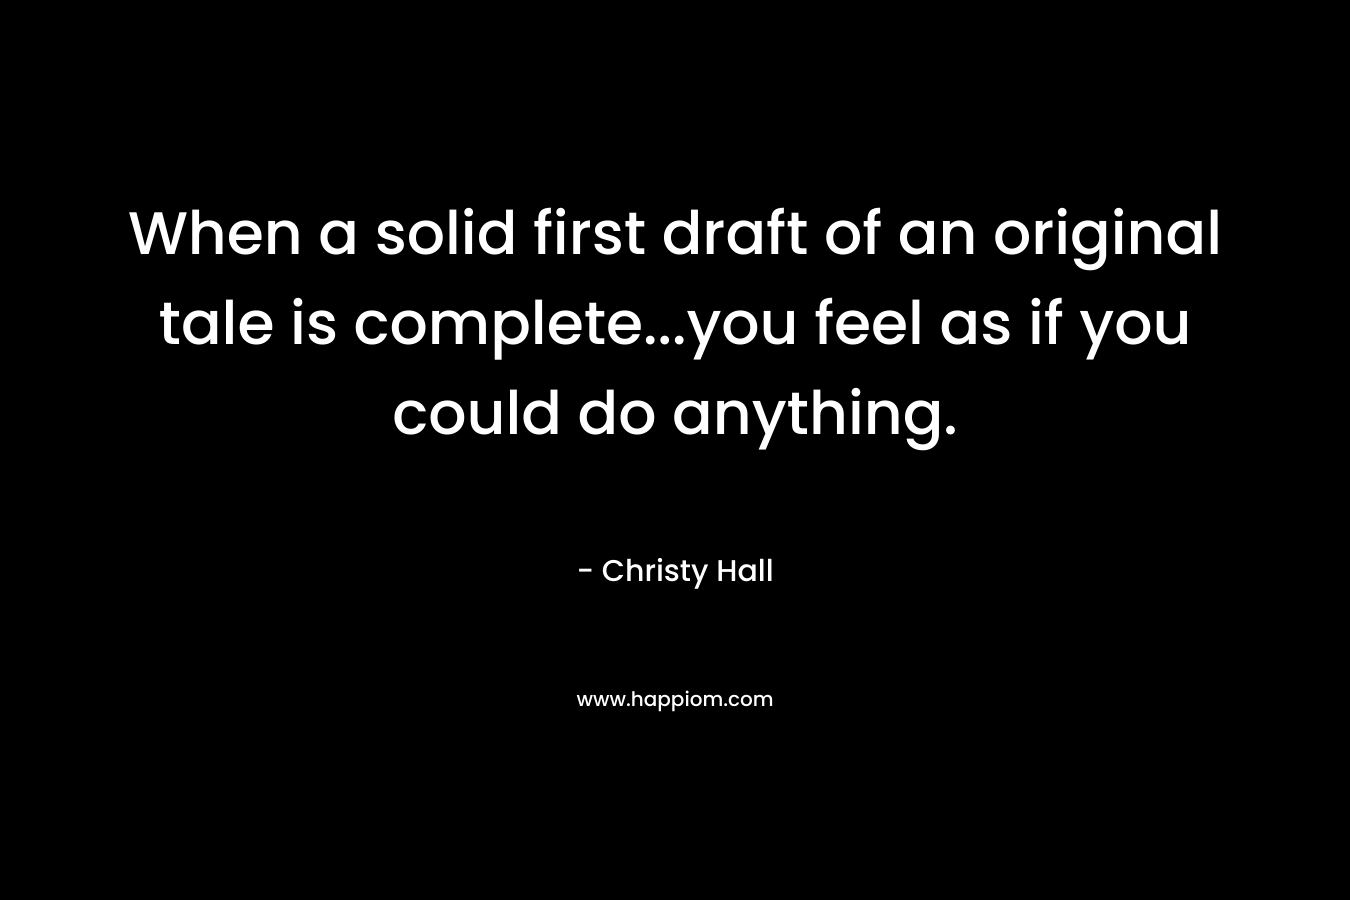 When a solid first draft of an original tale is complete...you feel as if you could do anything.